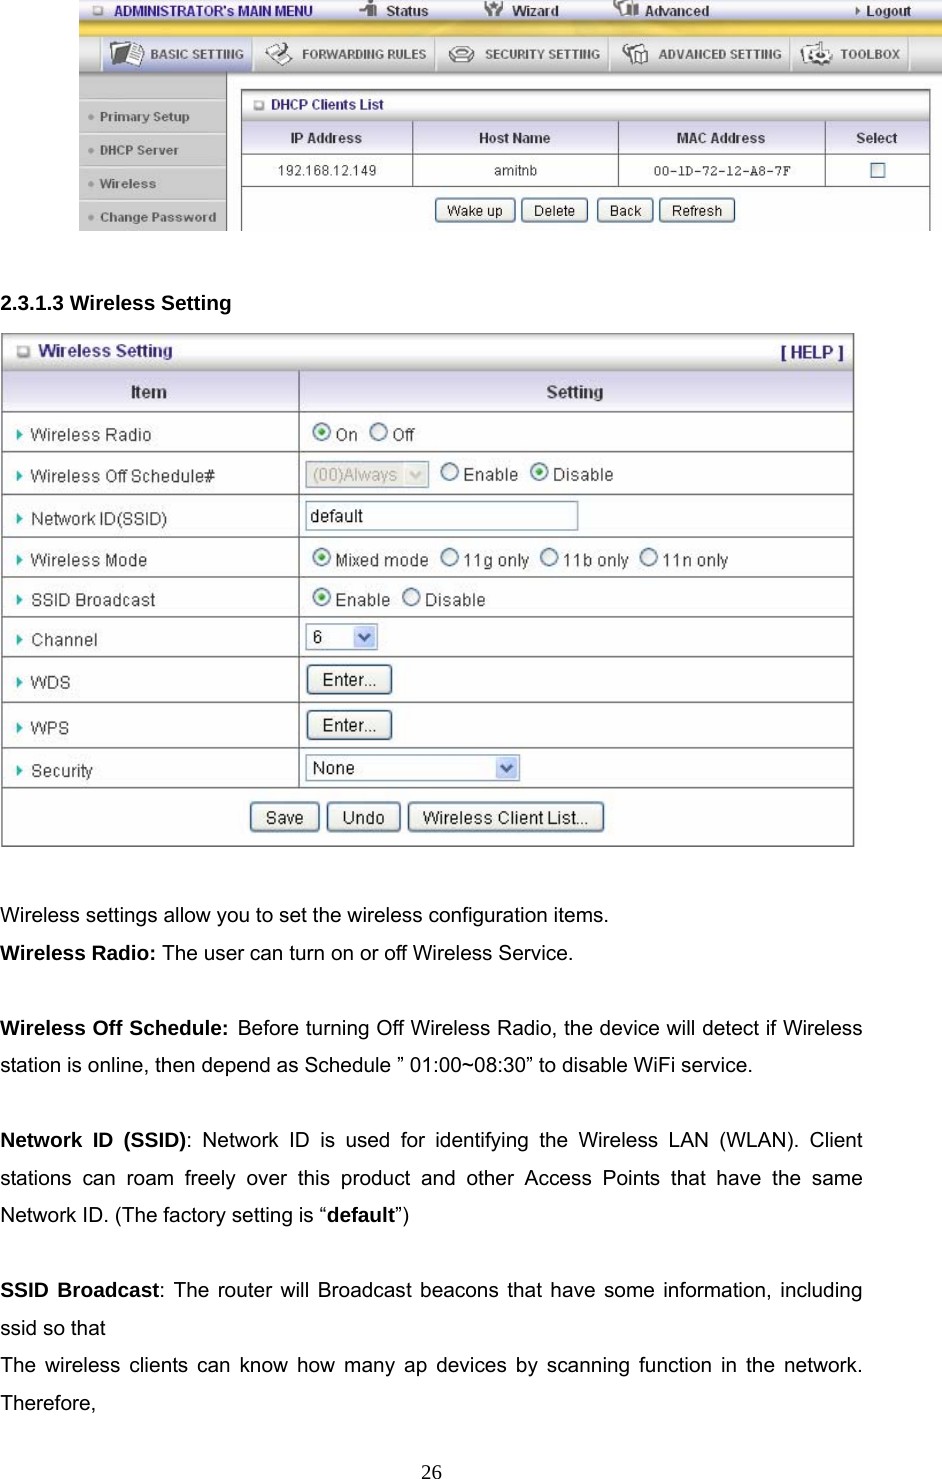  26  2.3.1.3 Wireless Setting   Wireless settings allow you to set the wireless configuration items. Wireless Radio: The user can turn on or off Wireless Service.  Wireless Off Schedule: Before turning Off Wireless Radio, the device will detect if Wireless station is online, then depend as Schedule ” 01:00~08:30” to disable WiFi service.  Network ID (SSID): Network ID is used for identifying the Wireless LAN (WLAN). Client stations can roam freely over this product and other Access Points that have the same Network ID. (The factory setting is “default”)  SSID Broadcast: The router will Broadcast beacons that have some information, including ssid so that   The wireless clients can know how many ap devices by scanning function in the network. Therefore, 